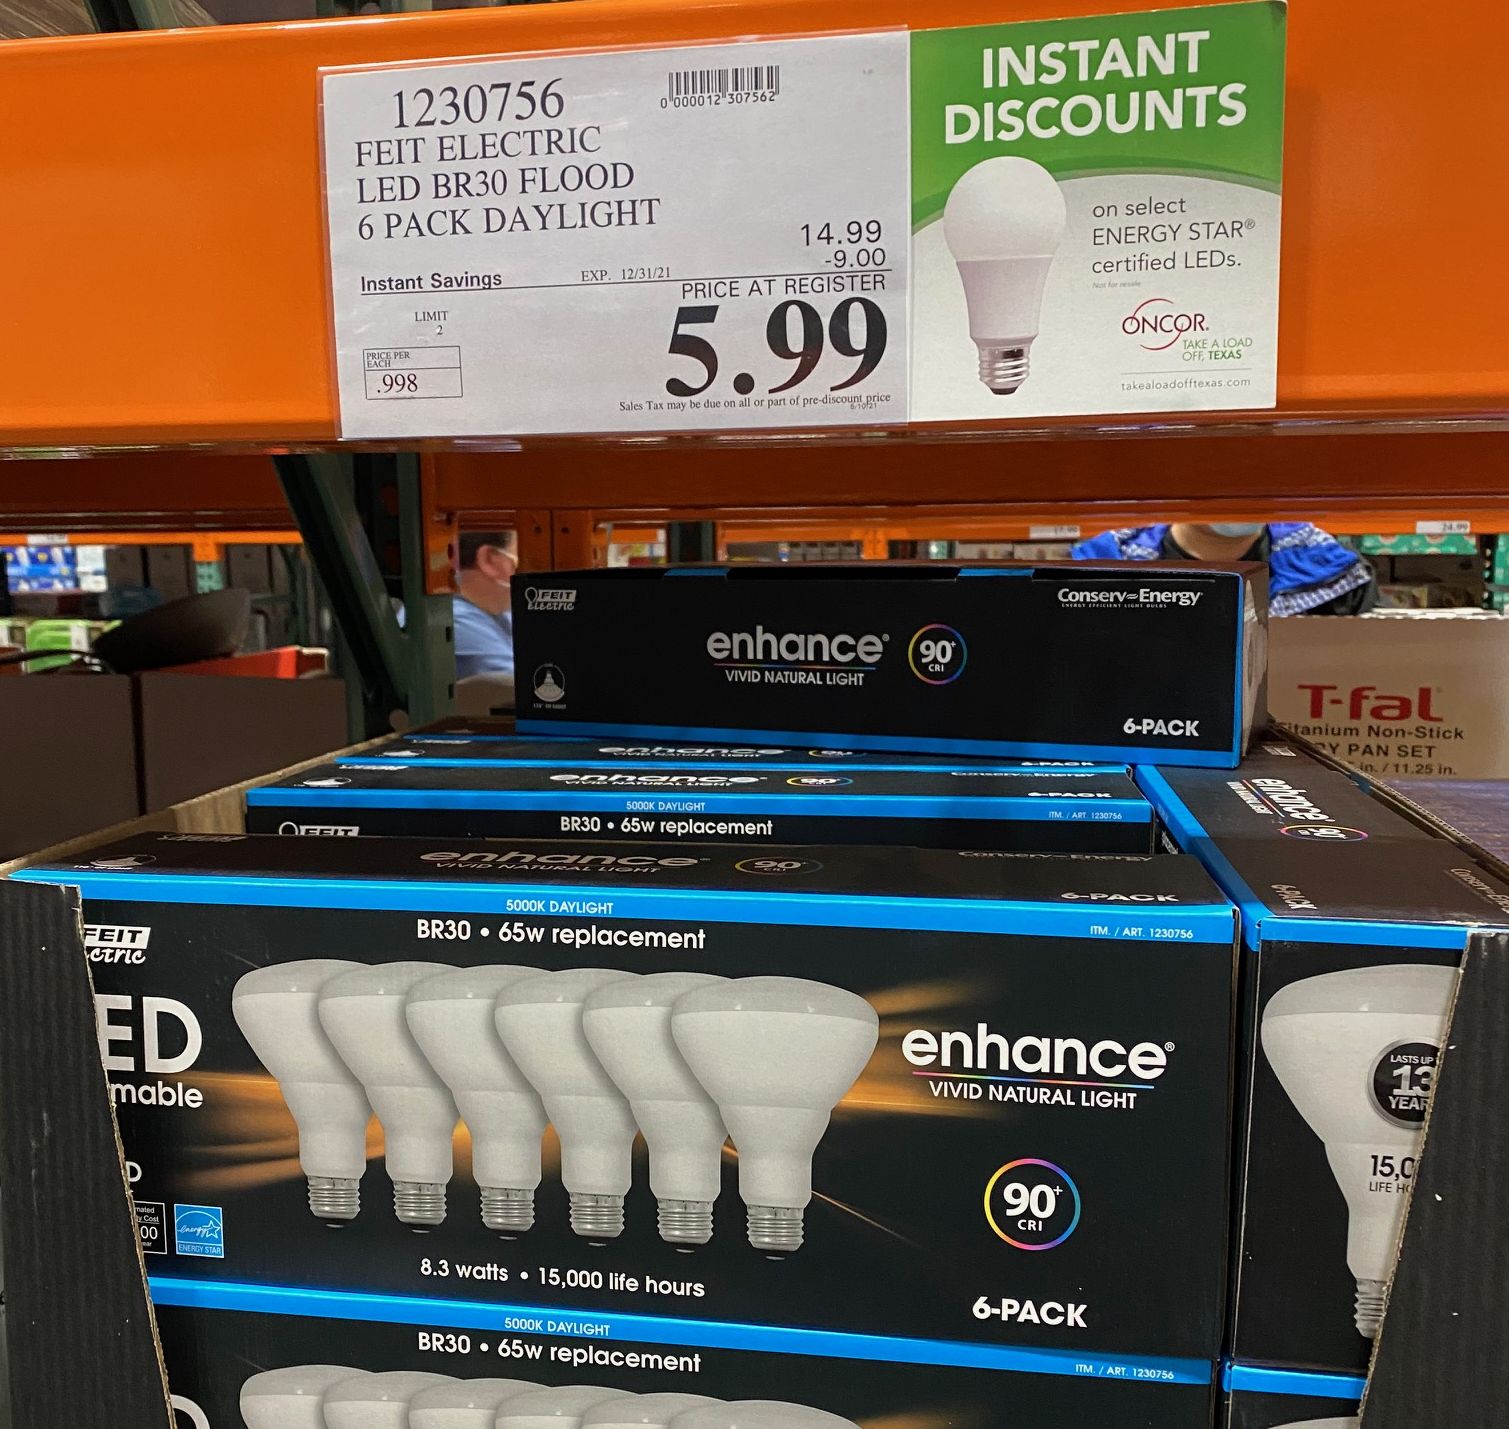 Costco Feit Electric BR30 6 Pack in store for $5.99 originally $14.99 - YMMV